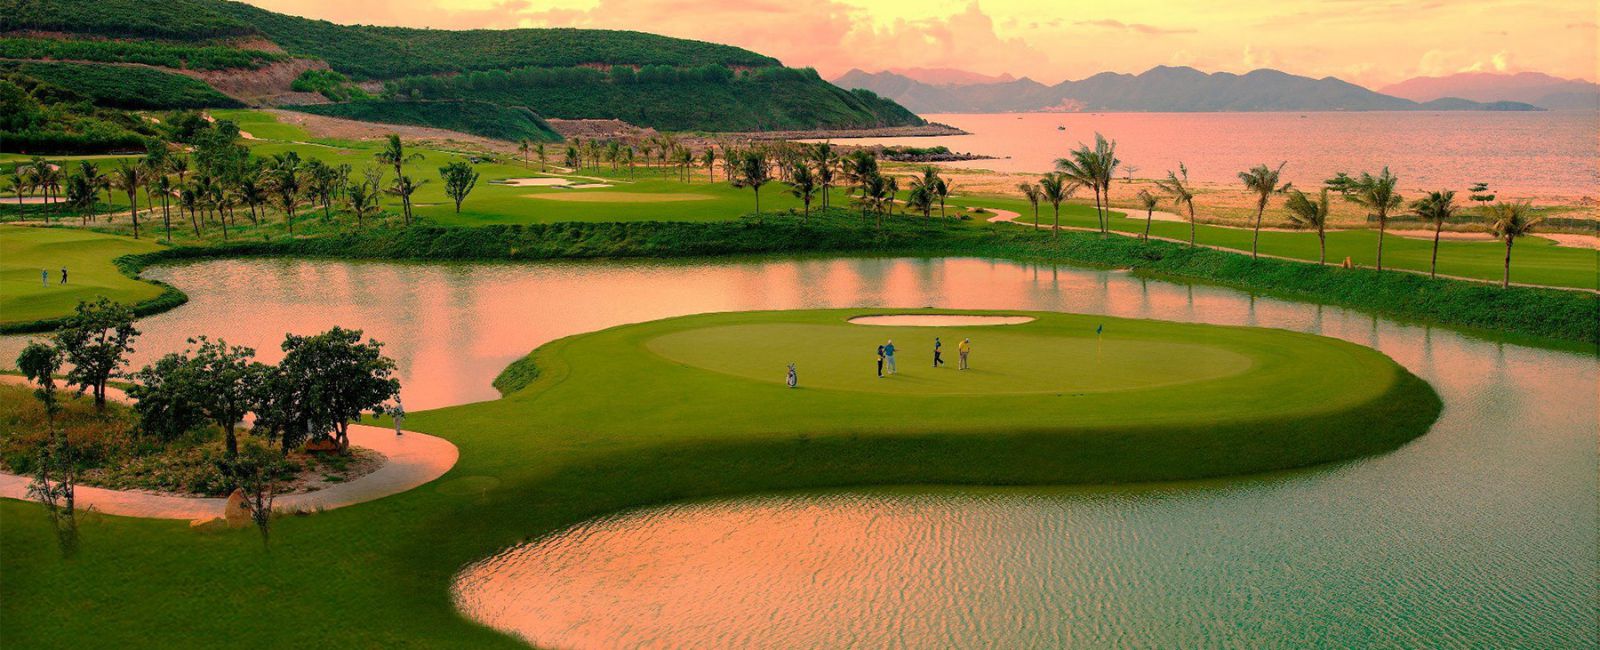 Nha Trang Golf Package 3 Days 2 Nights And 2 Rounds